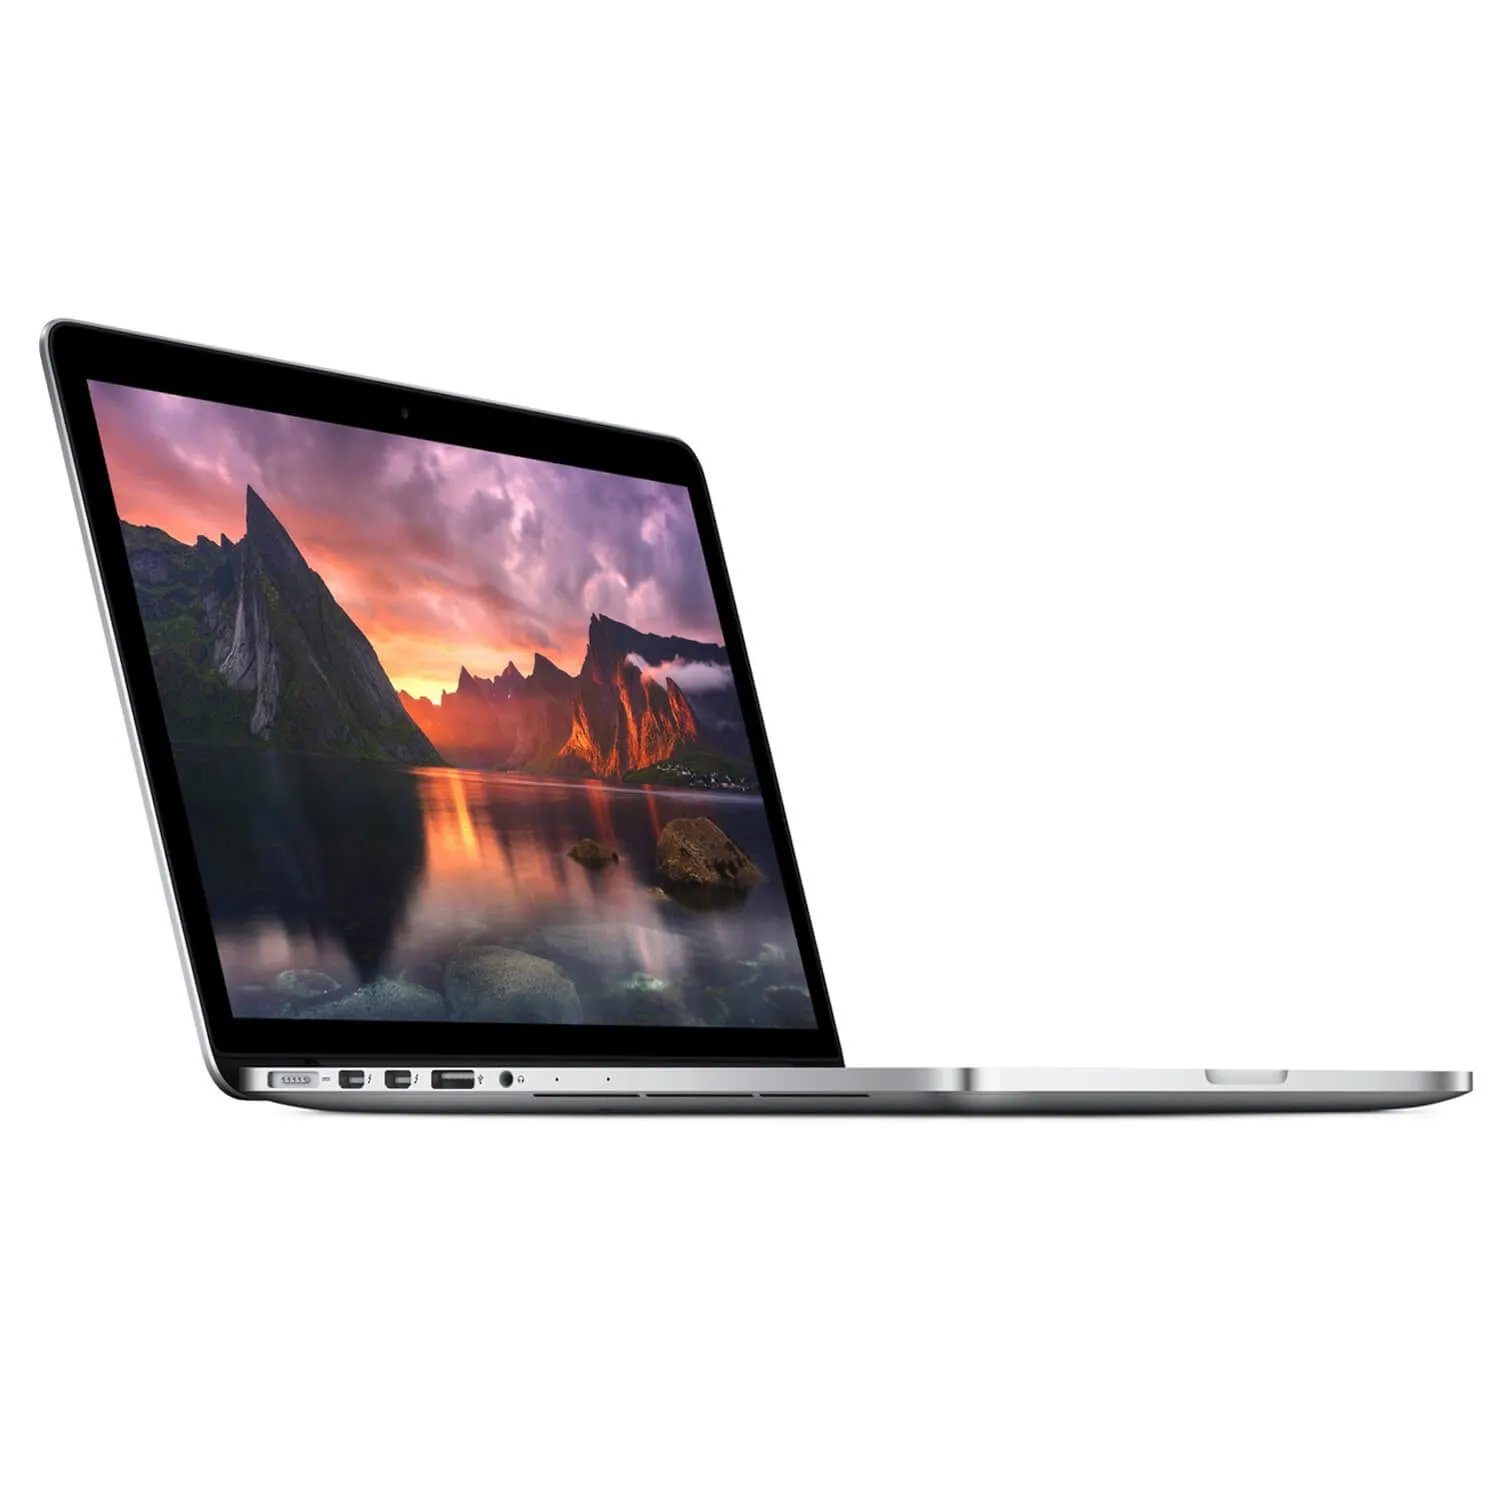 Buying a MacBook Pro 15 inch